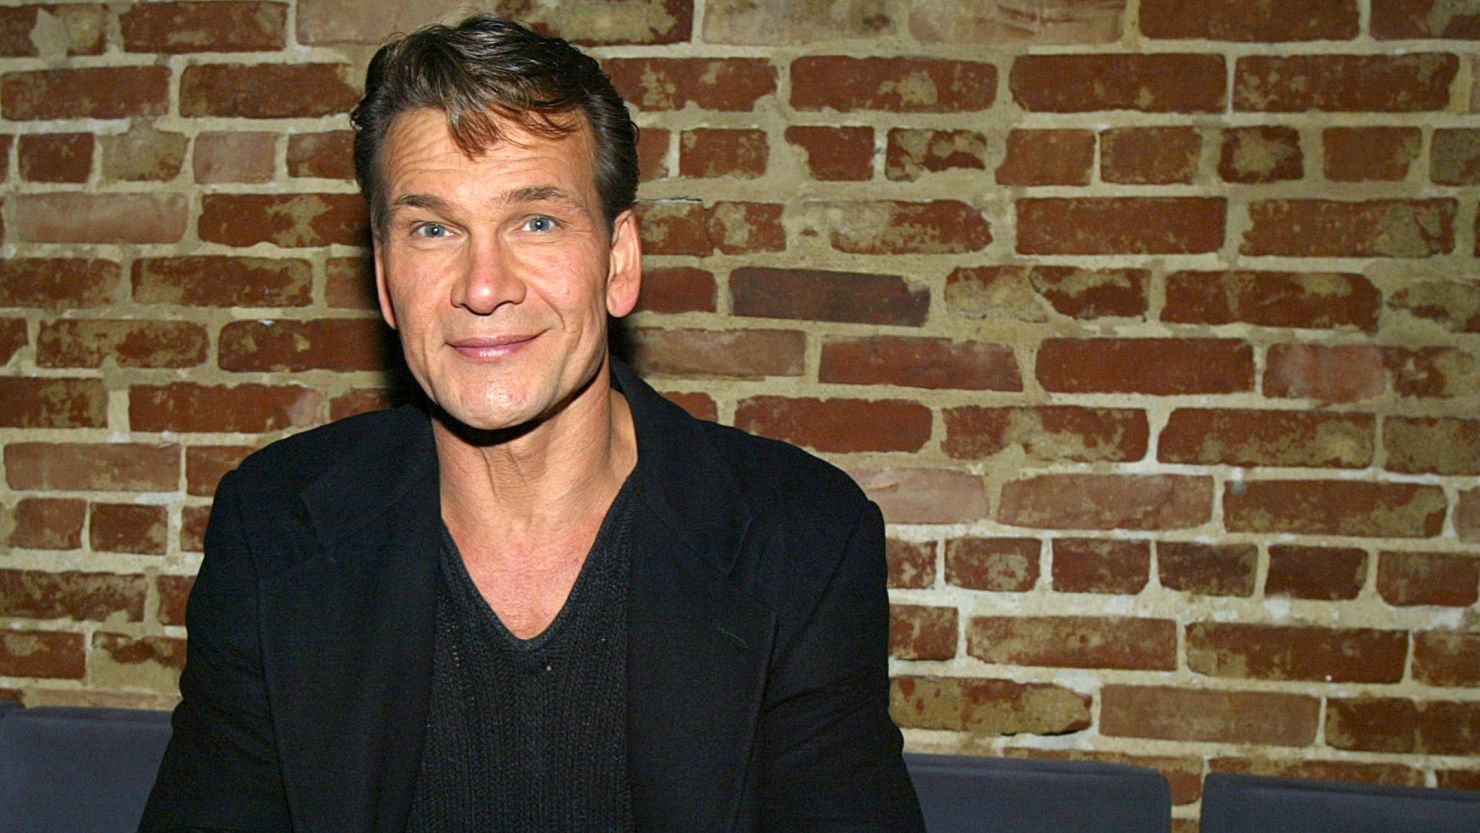 Patrick Swayze, here in 2004, would have turned 70 this week had he not passed from pancreatic cancer in 2009.